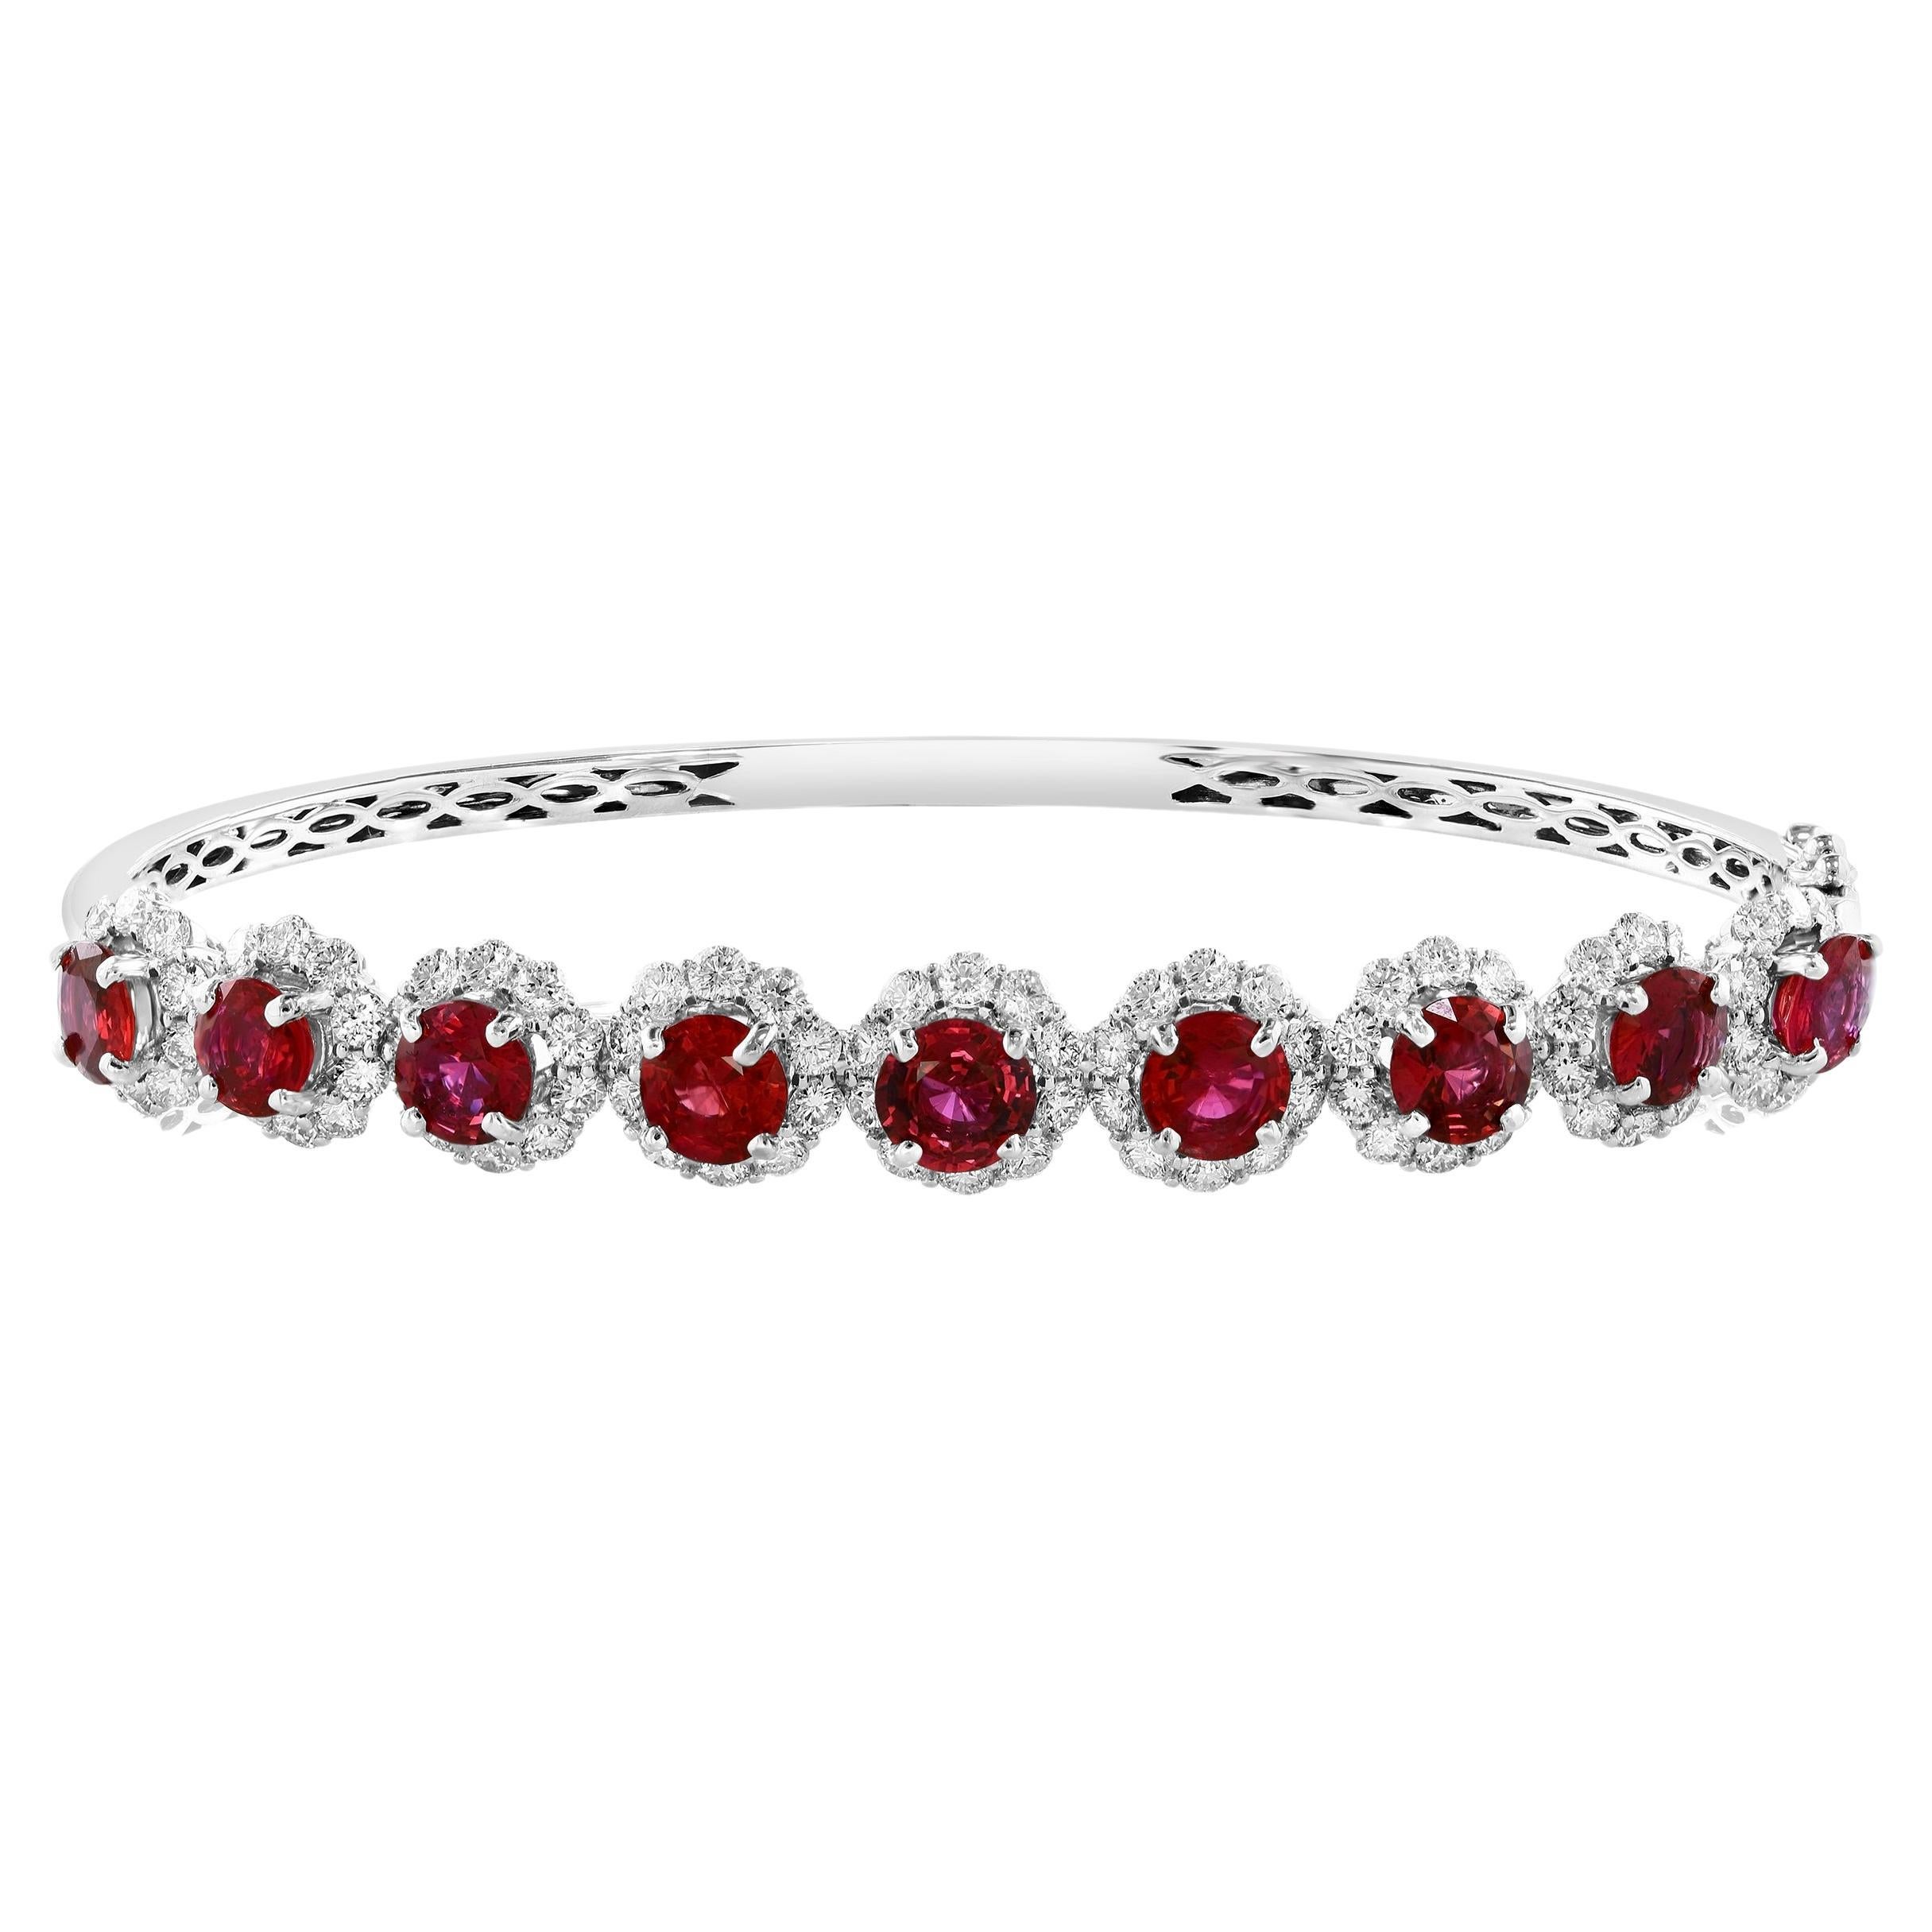 4.76 Carat Brilliant Cut Ruby and Diamond Bangle Bracelet in 18k White Gold For Sale